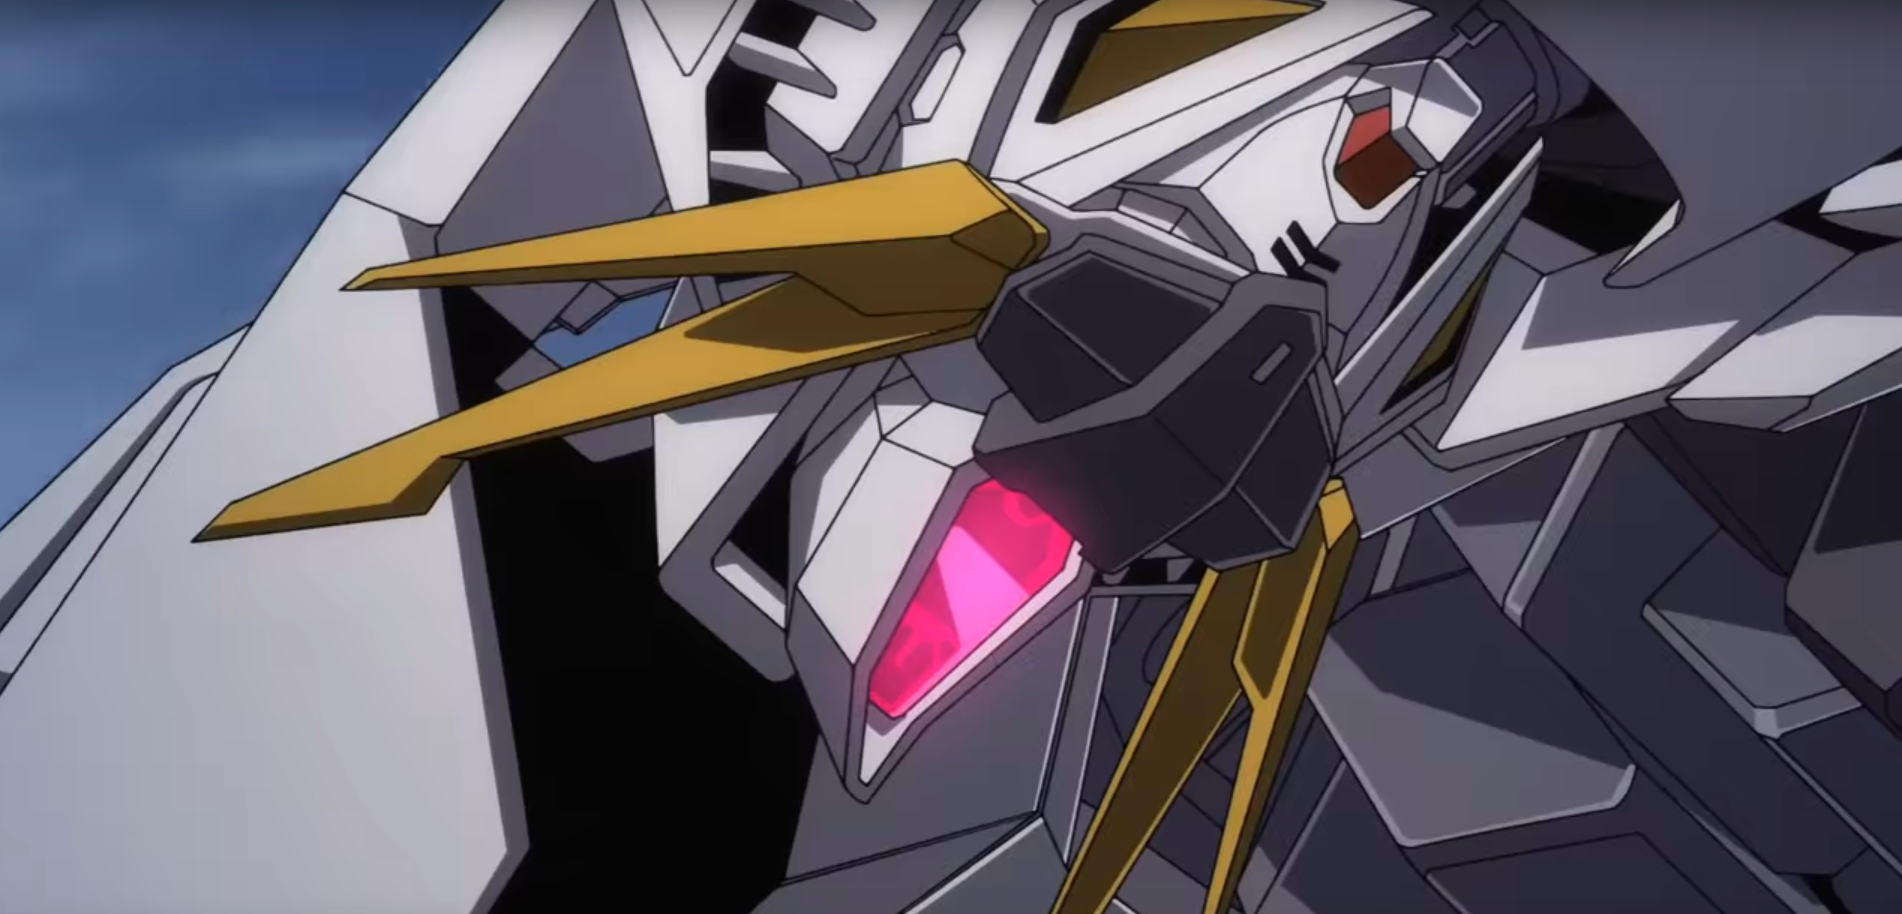 You are currently viewing Mobile Suit Gundam: Hathaway’s Flash – Trailer #1